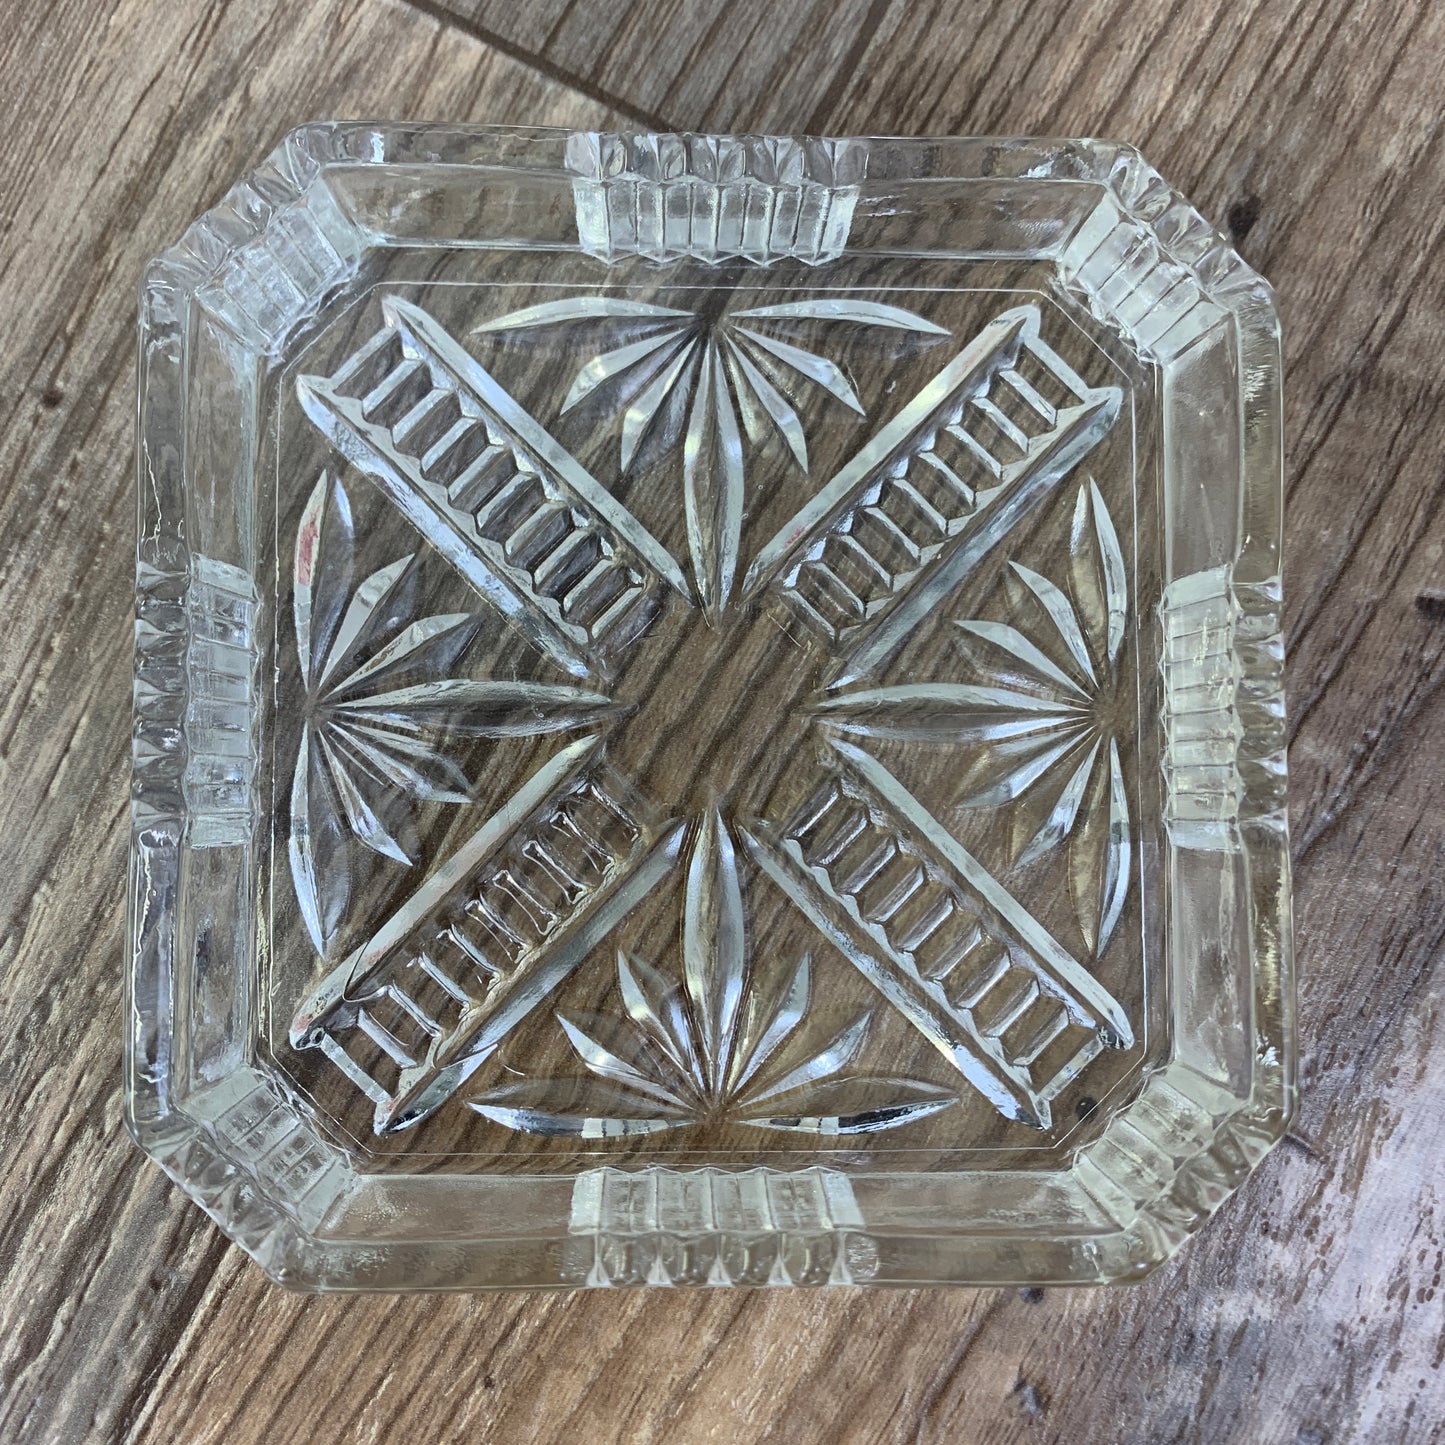 Small Pressed Glass Dish with Metal Tray, Vintage Butter Dish, Elegant Tableware, Housewarming Gift